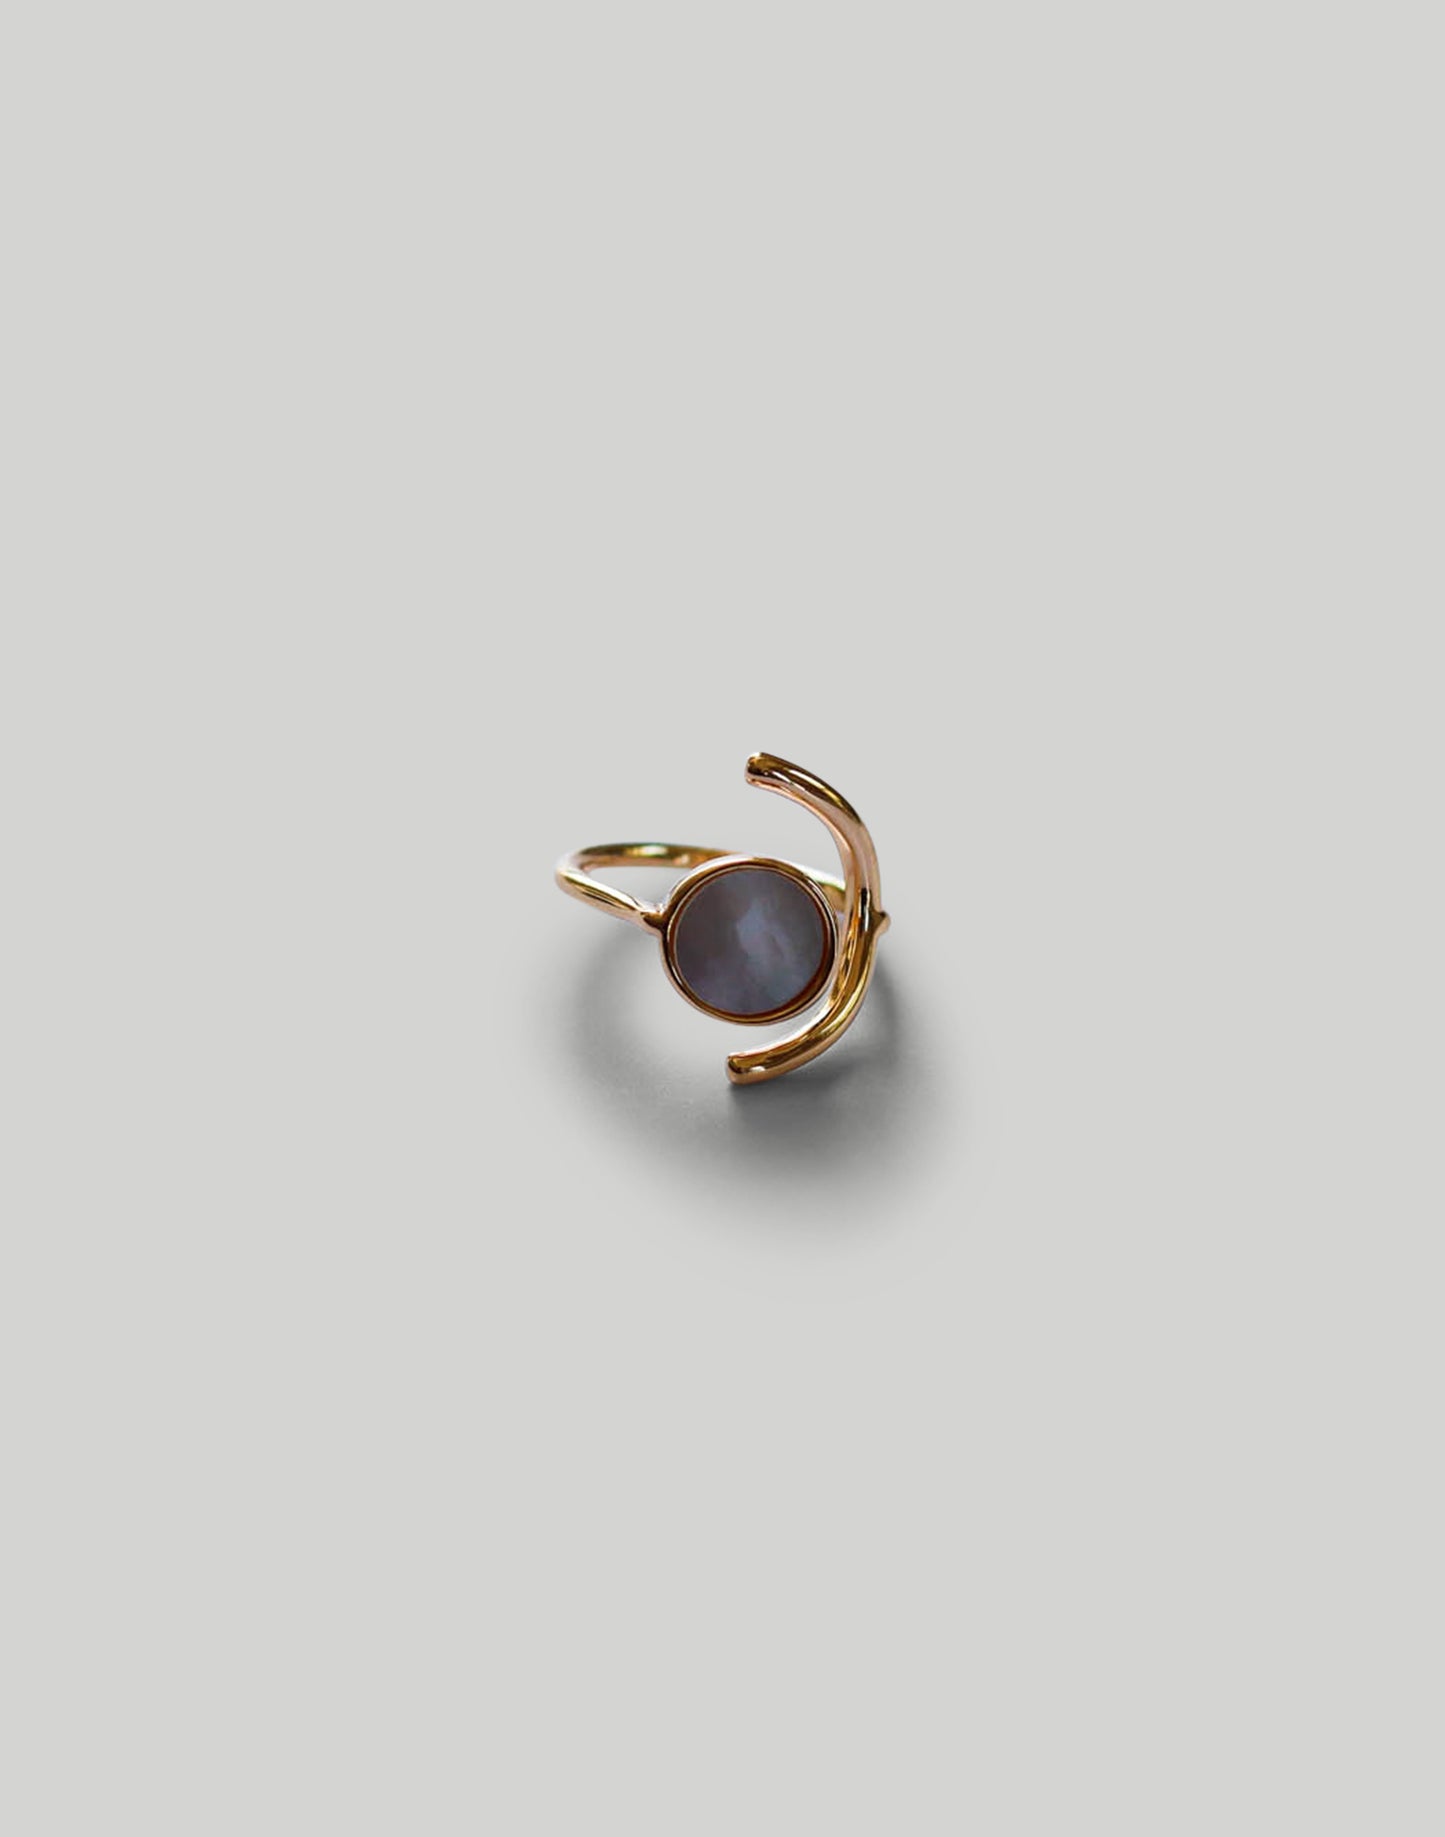 The Geo Crescent Pearl Adjustable Ring